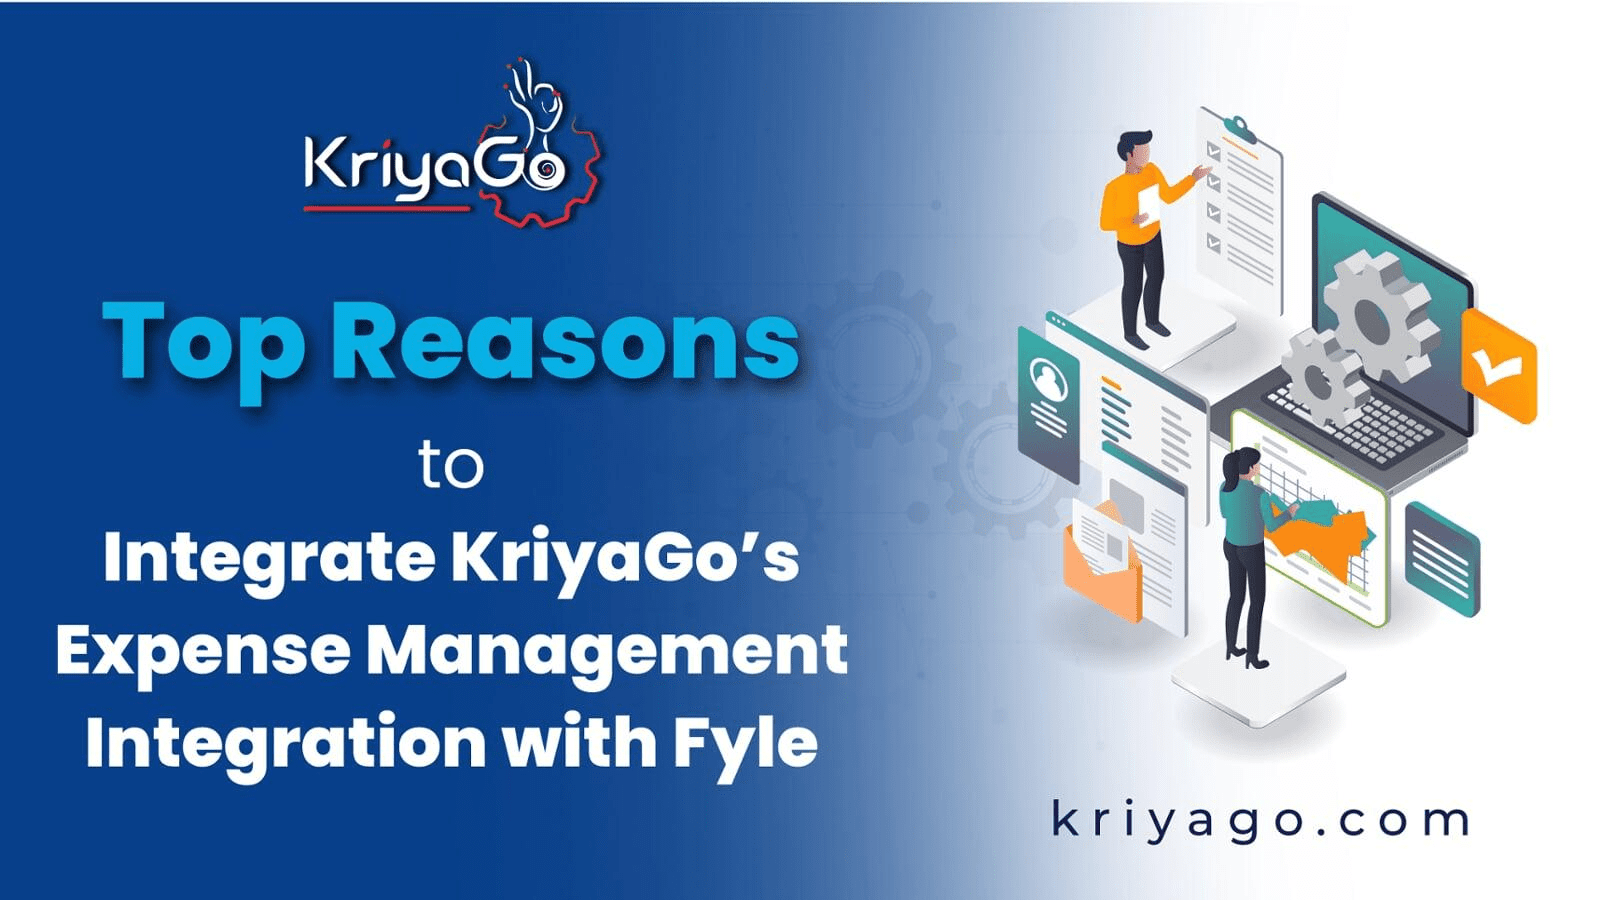 Top Reasons to Integrate KriyaGo's Expense Management Integration with Fyle